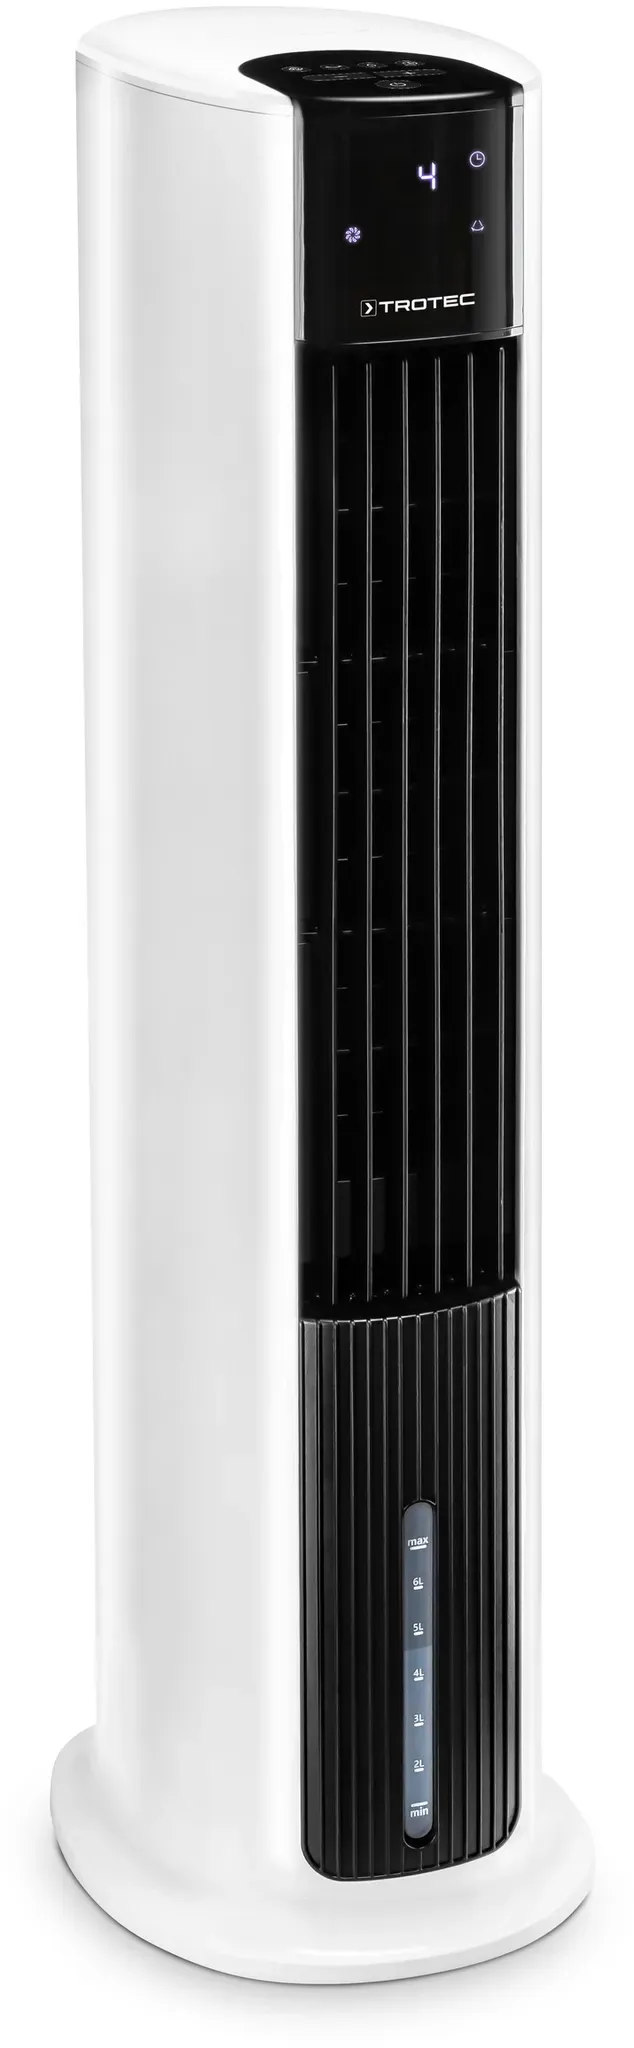 Trotec Aircooler, Luchtkoeler, Luchtbevochtiger PAE 30